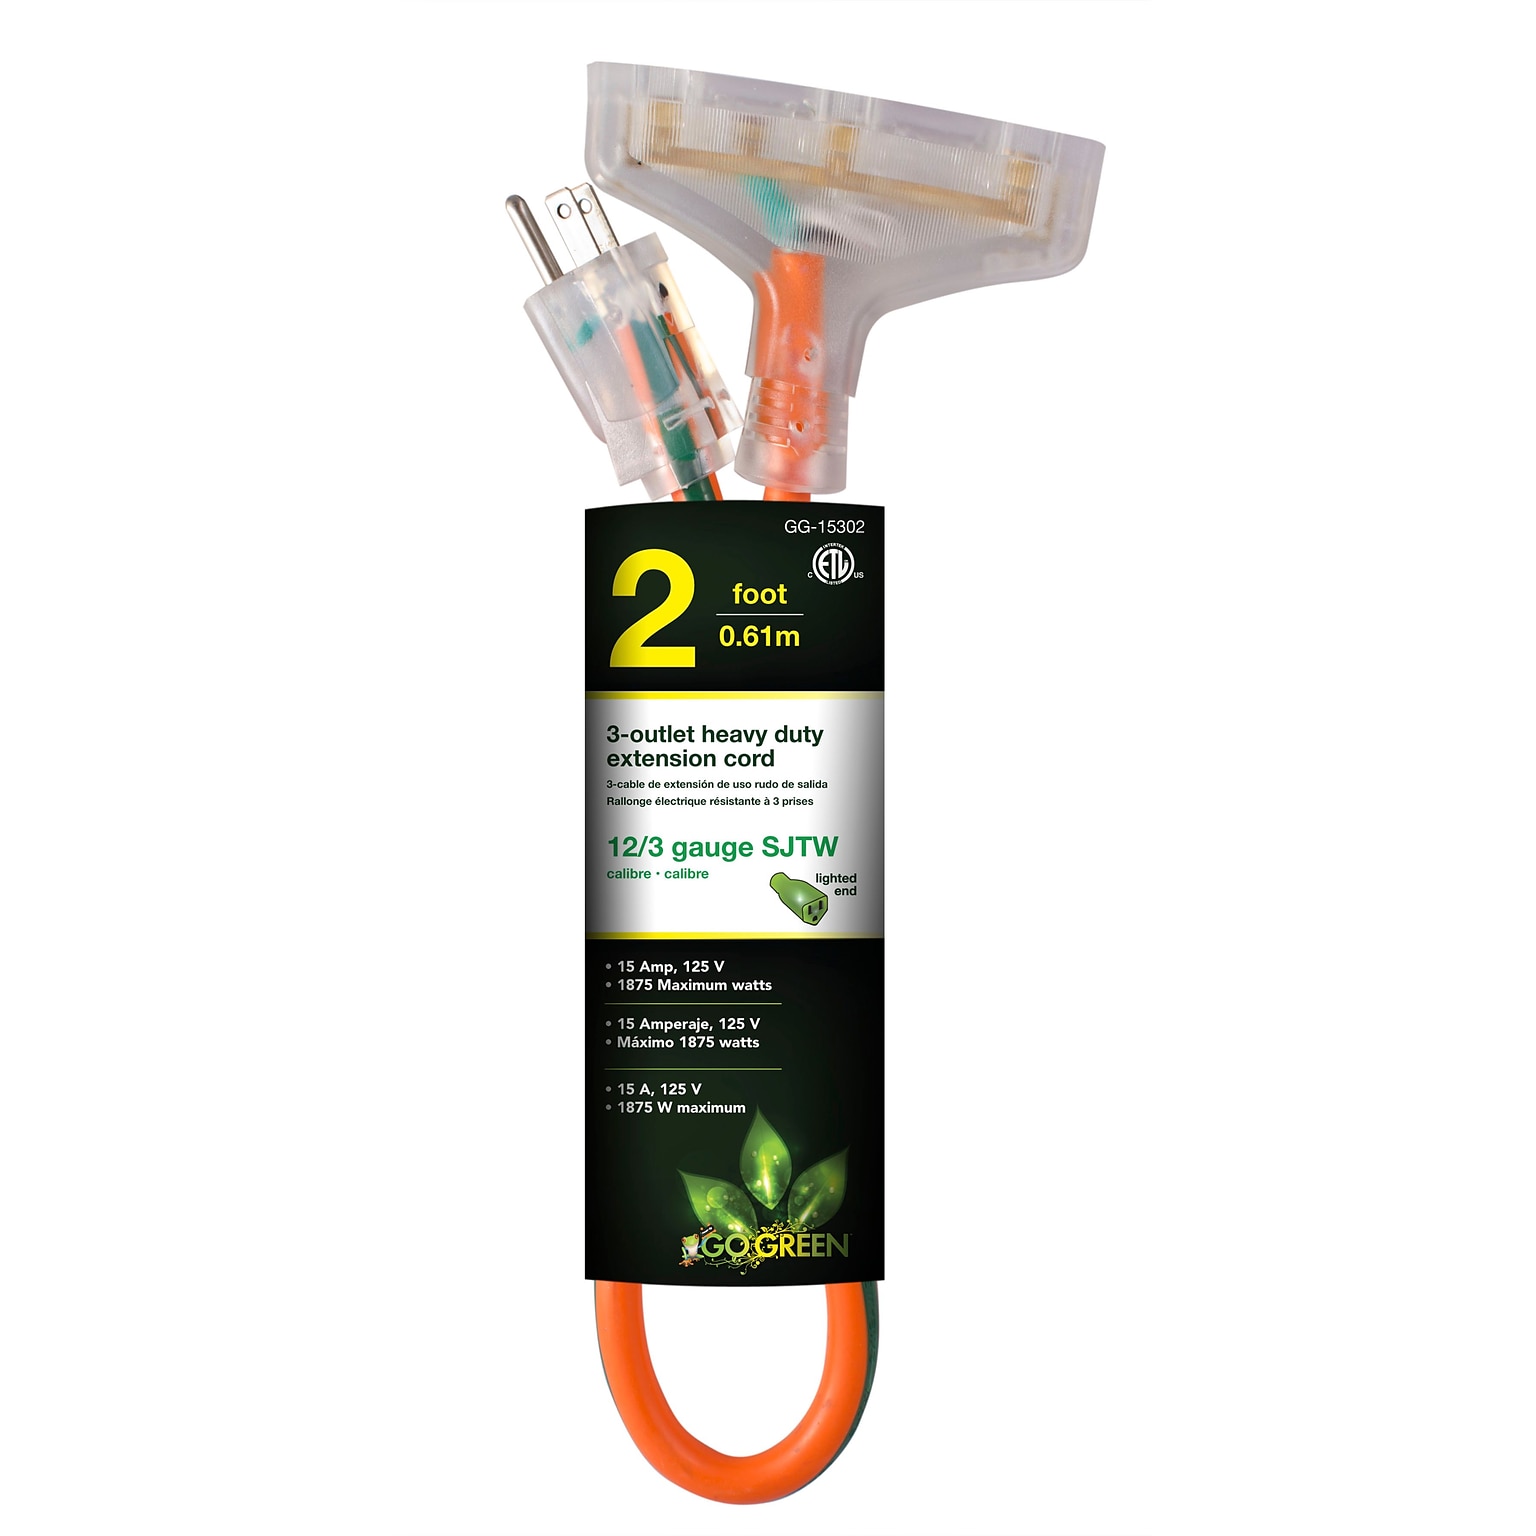 GoGreen Power 2 Indoor/Outdoor Extension Cord, 3-Outlet, 12 AWG, Orange (GG-15302)